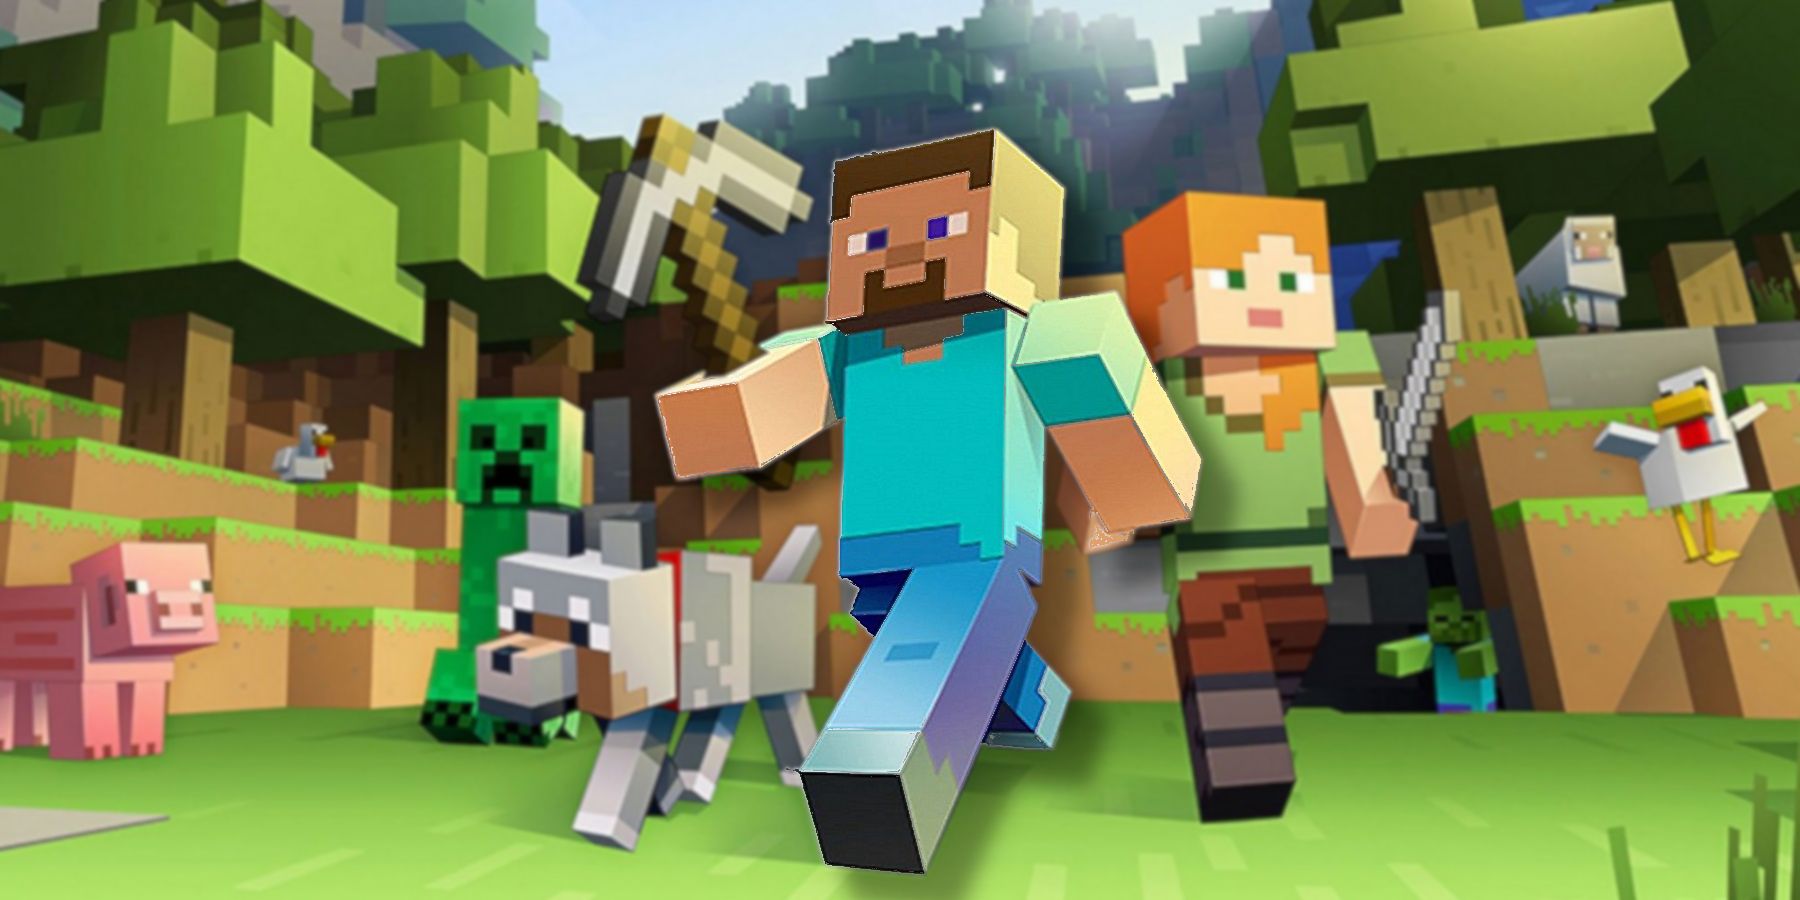 Image from Minecraft showing numerous characters and mobs in the foreground with a forest in the background.